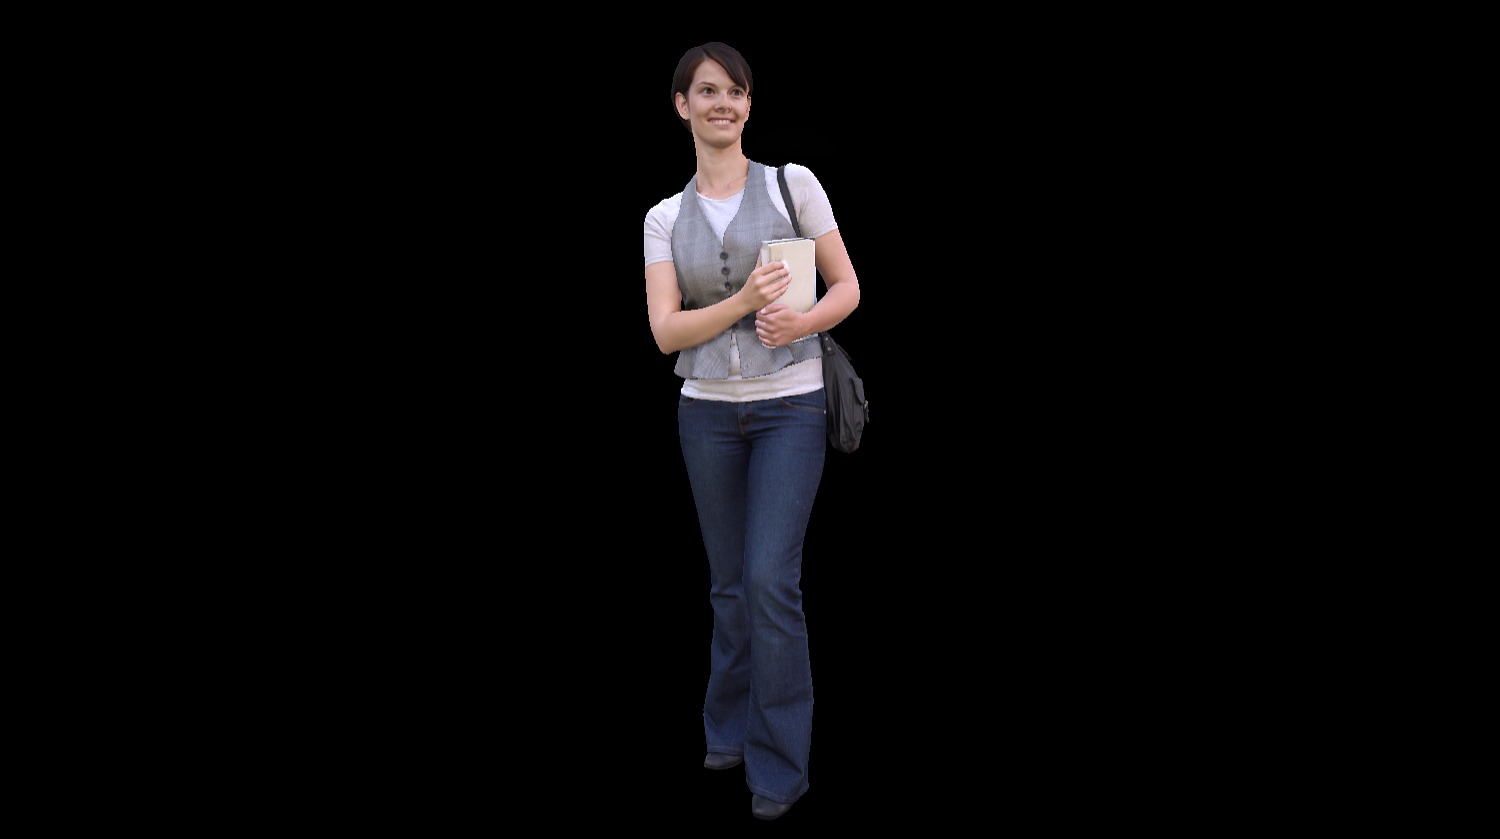 This model is part of AXYZ design Metropoly 3d human collection.
Specially designed for arch viz, they are unmatched in resolution and quality.

Commercial product is available with:


Hi resolution texture maps 4K,
Normal maps,
V-RAY materials!

For more information, visit:
https://secure.axyz-design.com/product-category/3d-people?cnpf=1&amp;cat_cat=72&amp;cnep=0&amp;attr_format-visibility=505&amp;axyzan=sketchup - CWom0307-HD2-O01P01-S - 3D model by AXYZ design (@pippo2002) 3d model